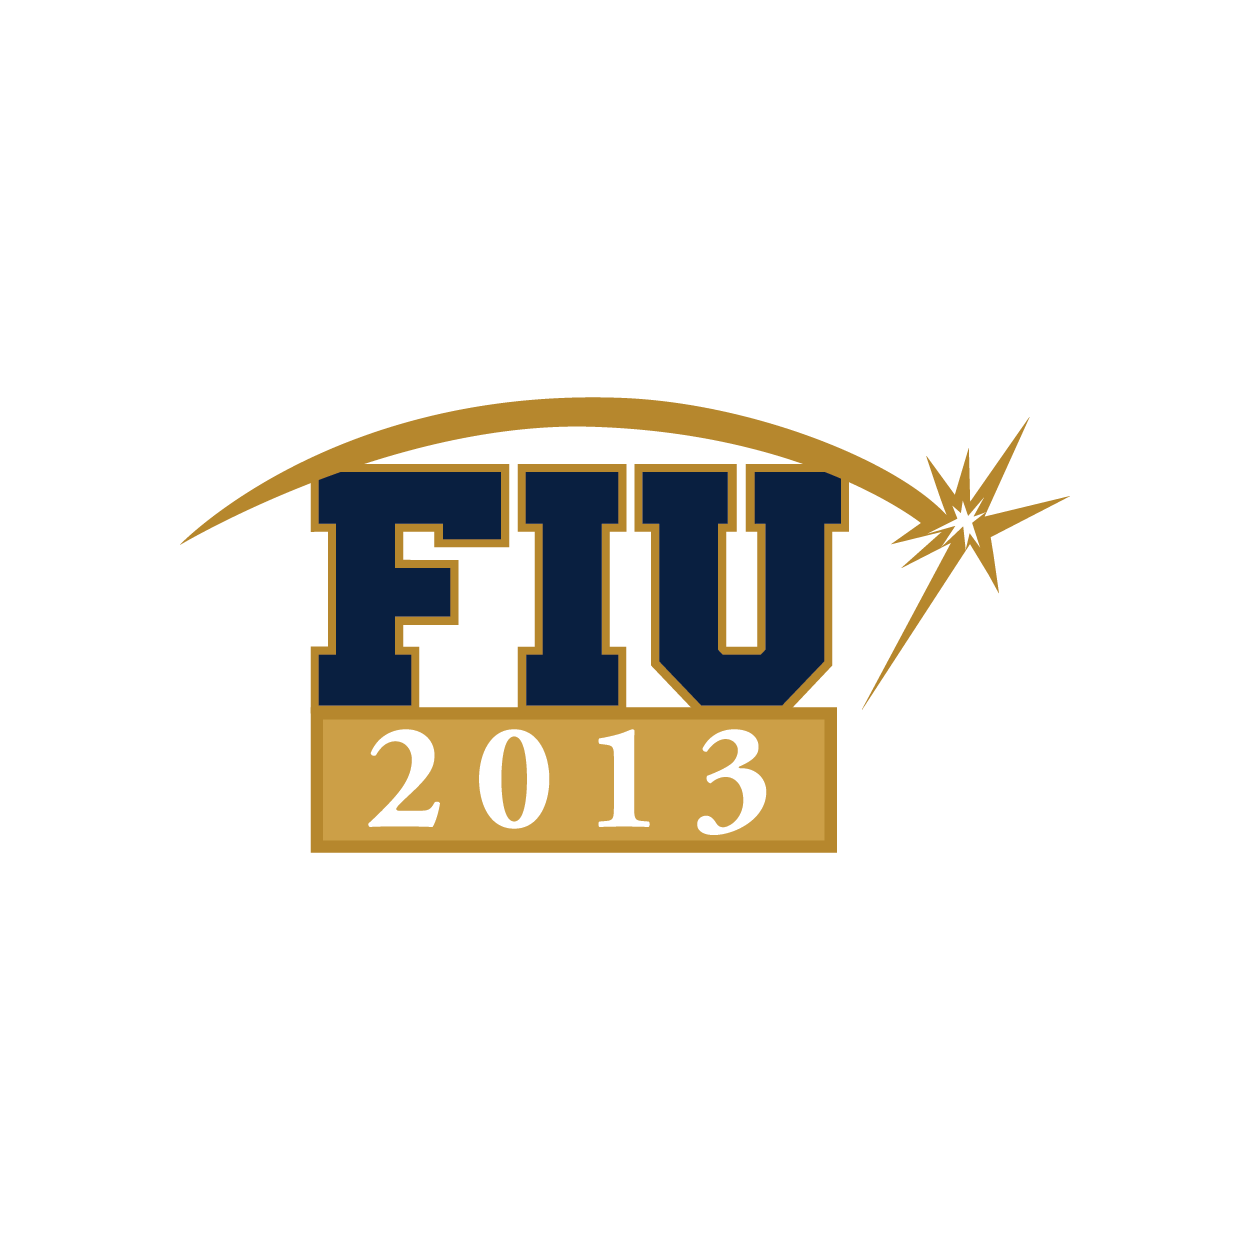 The pin for 2013 was a navy blue FIU with a gold spark over it and 2013 in gold under FIU